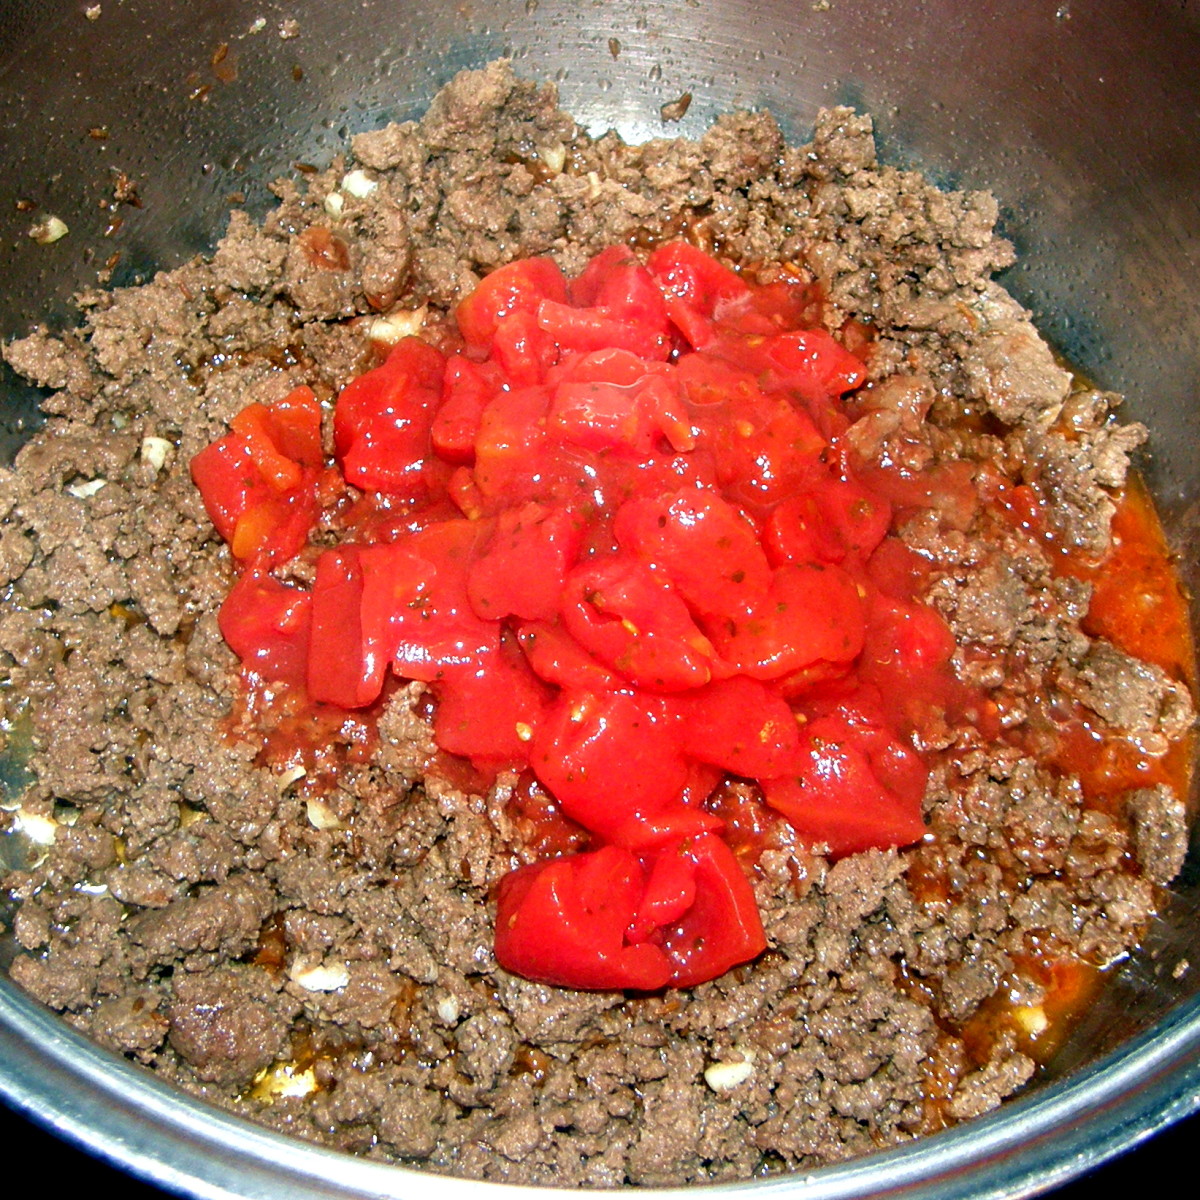 Add in the stewed tomatoes.